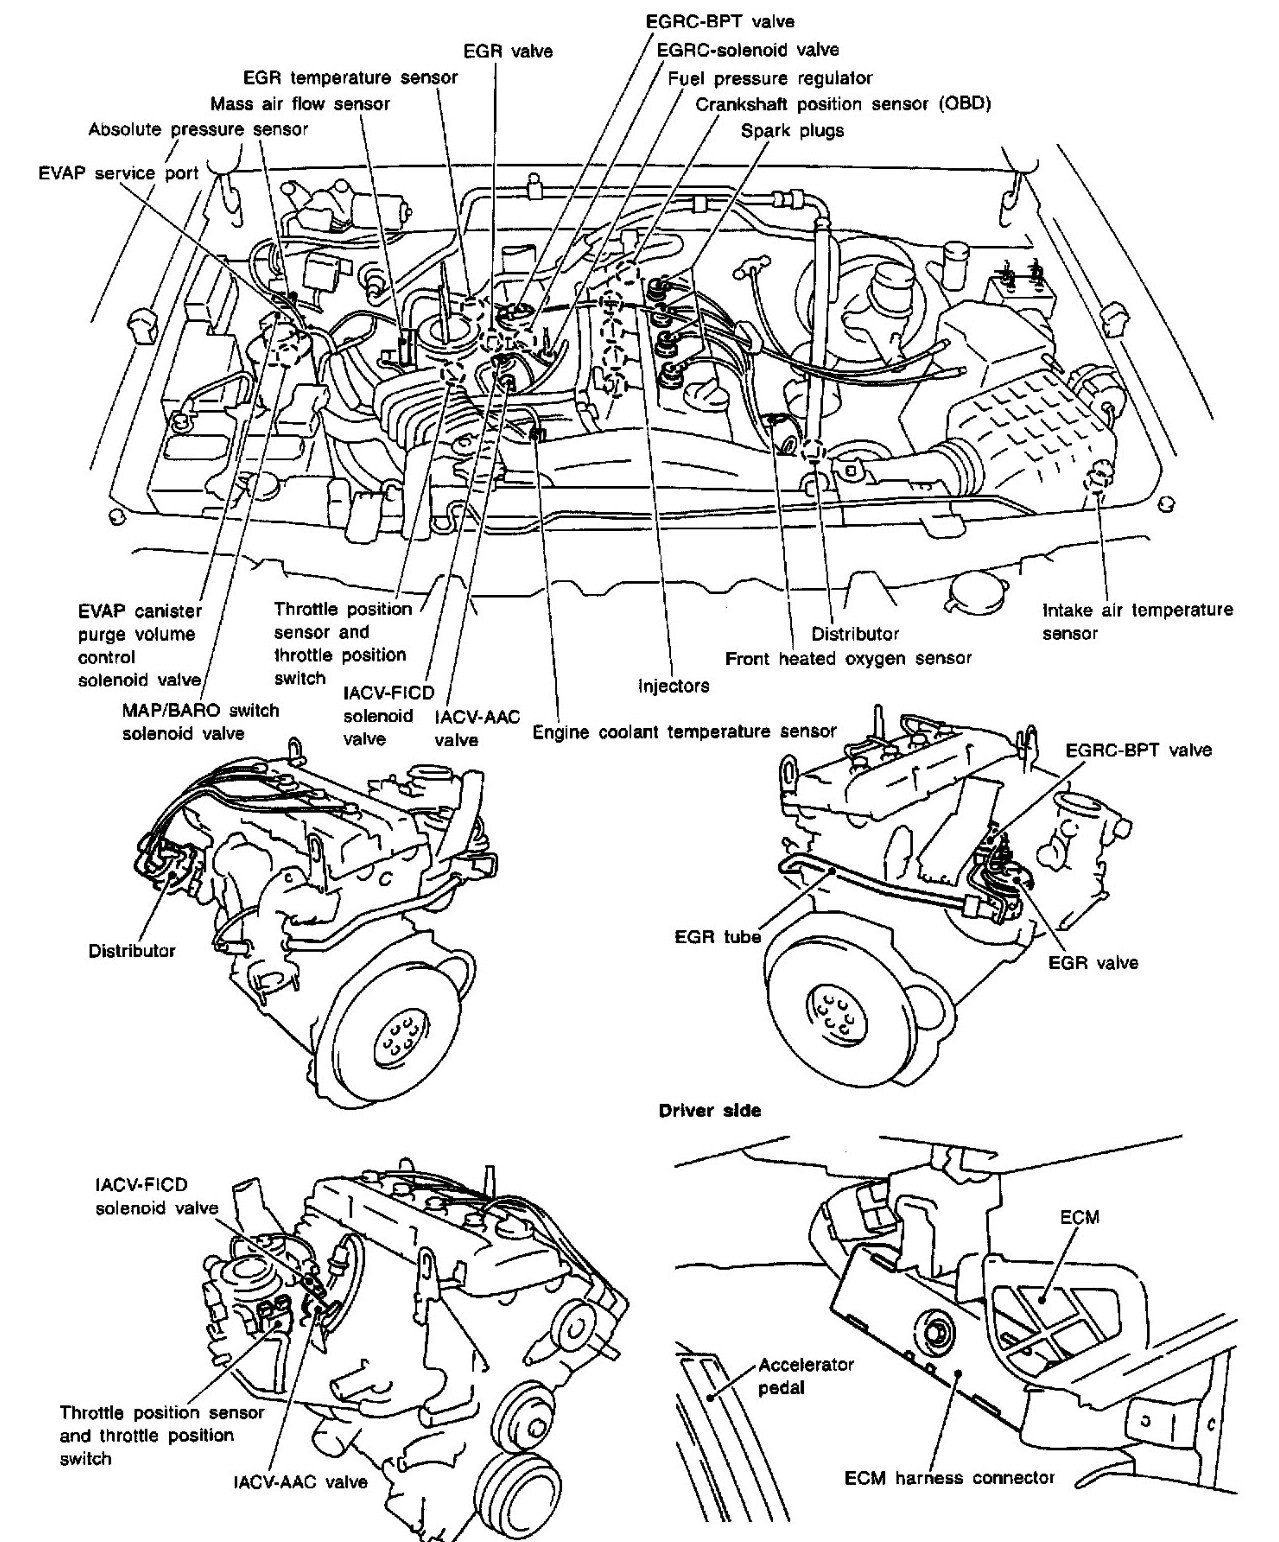 1999 Nissan Quest Engine Diagram My 2000 Nissan Frontier 2 4l Manual Trans when In Between Shifts Of 1999 Nissan Quest Engine Diagram